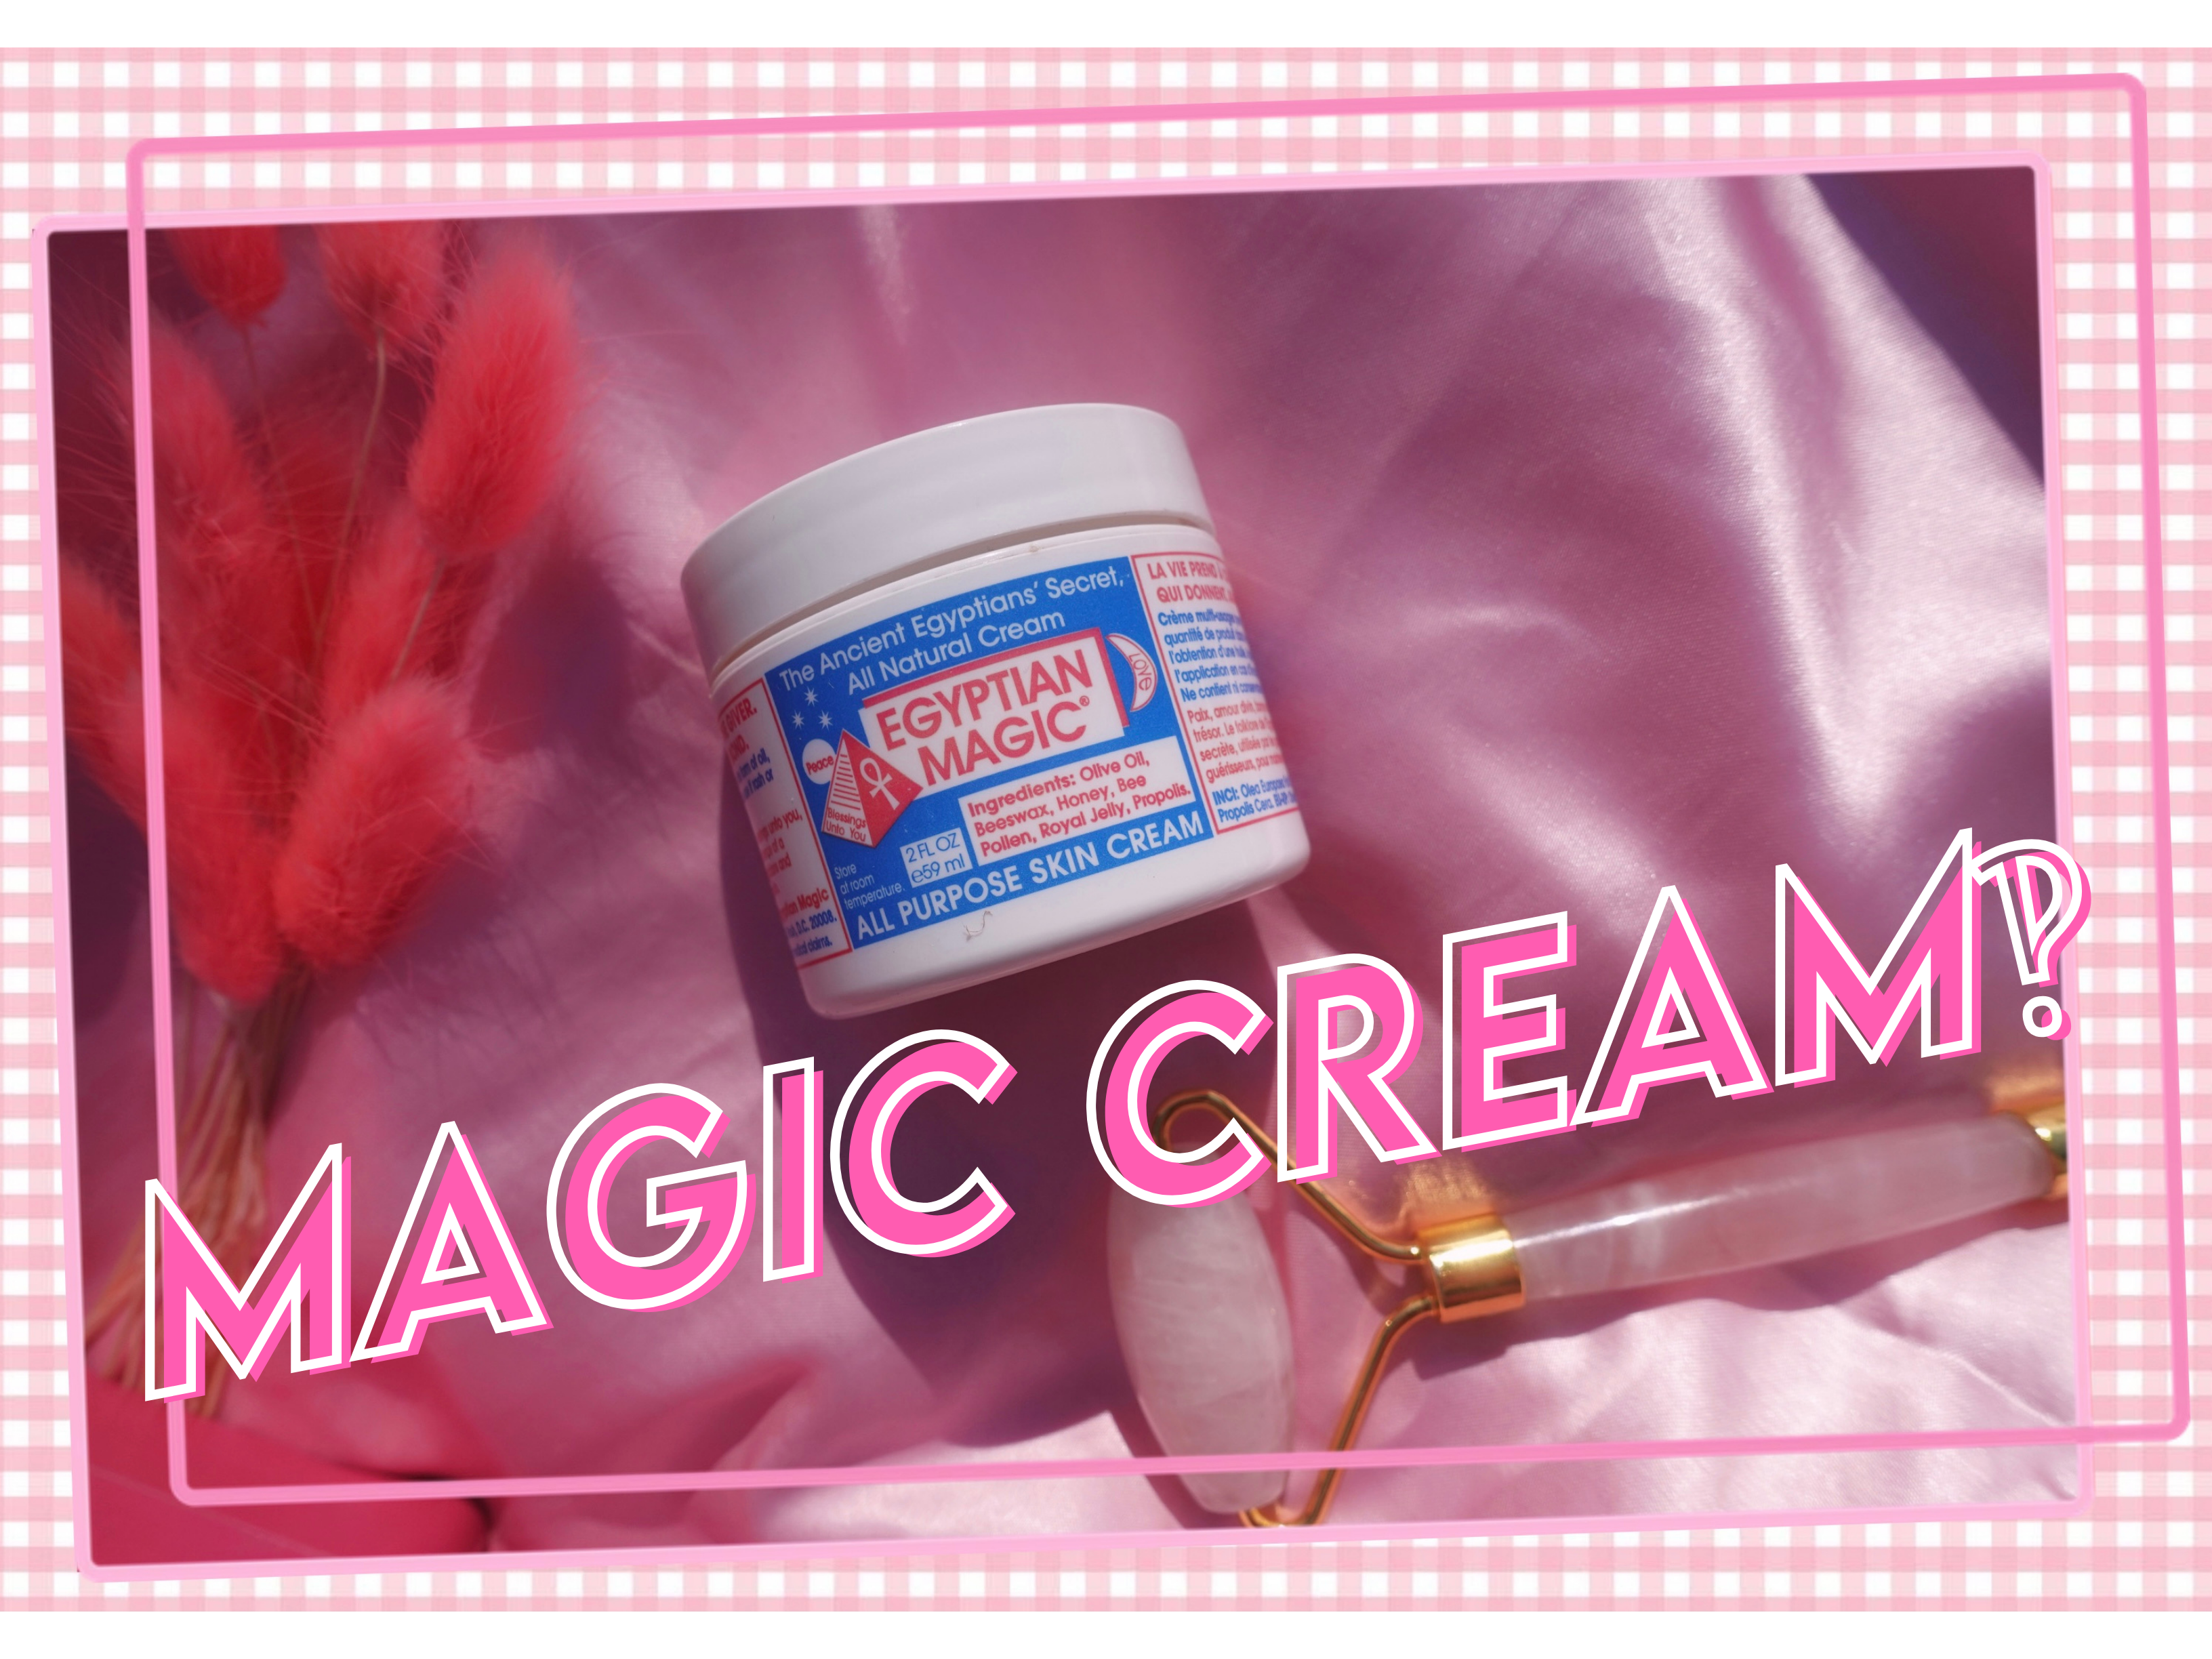 The Magic Cream That Everyone’s Talking About | Egyptian Magic Review